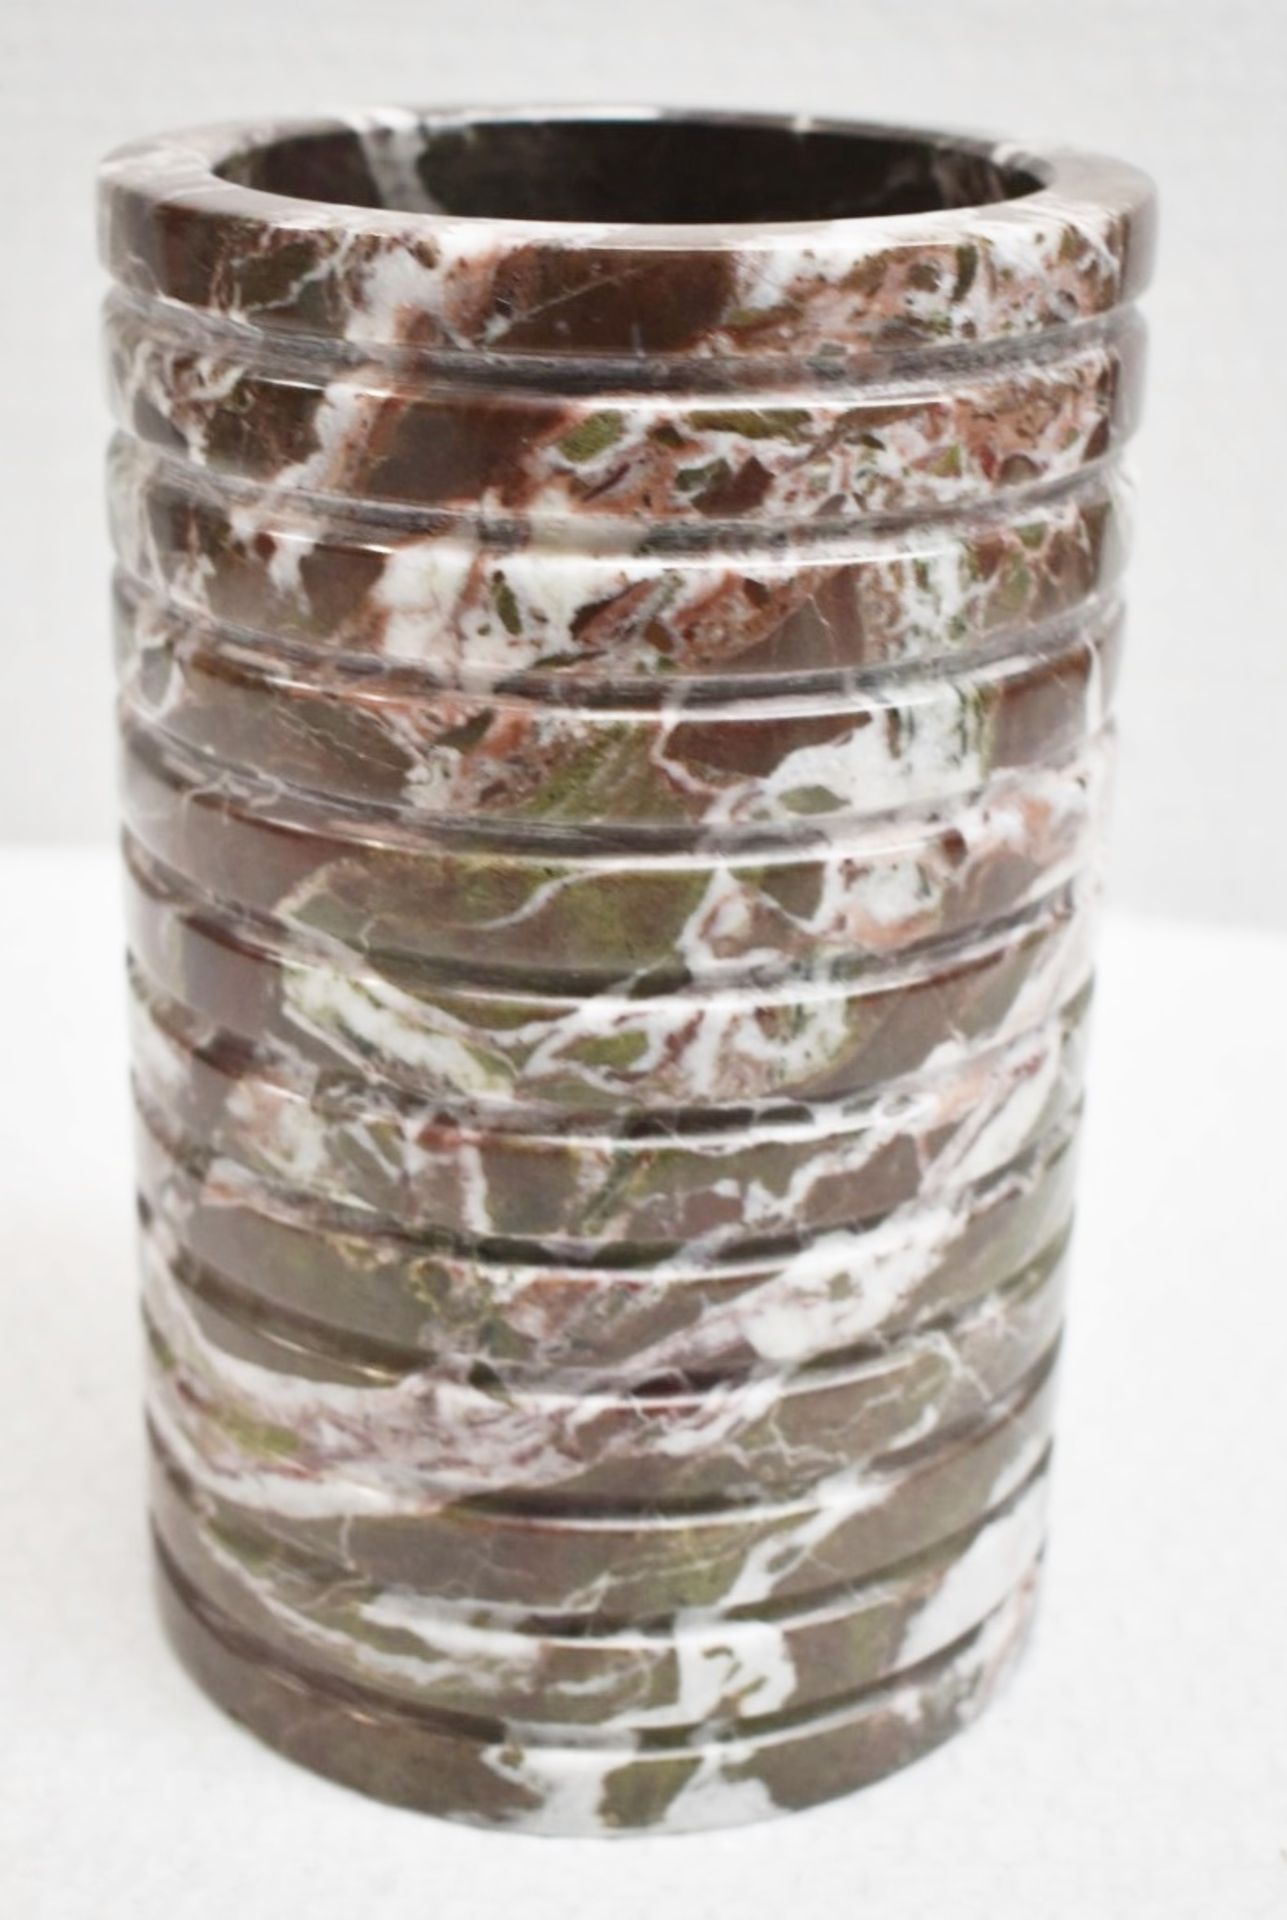 1 x SOHO HOUSE 'Pave' Red / Green Marble Wine Cooler - Original Price £110.00 - Unboxed Stock - Image 2 of 7